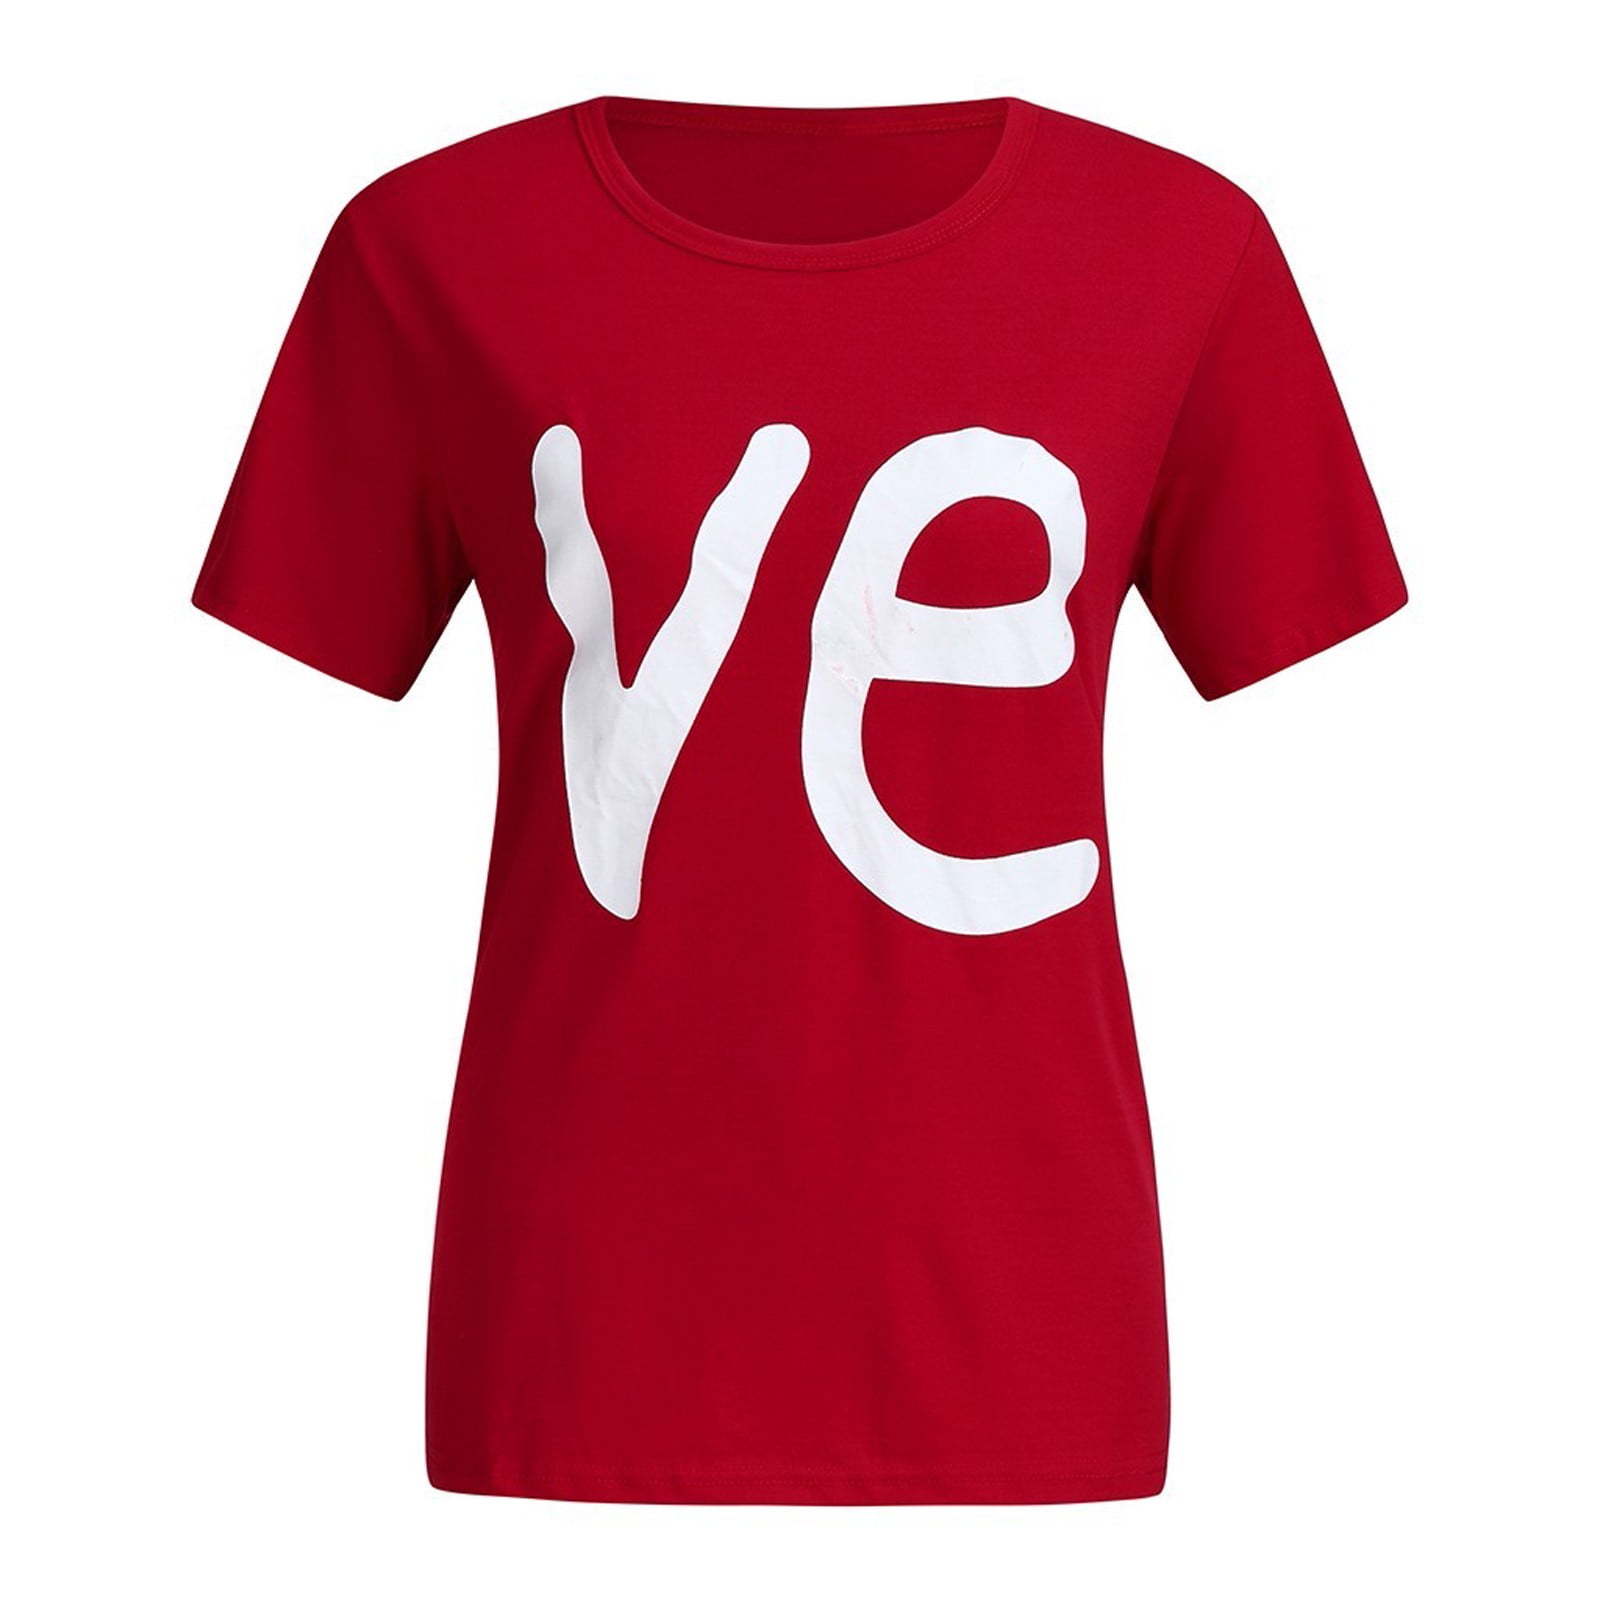 Pretty Short-sleeve Love Letter Printed Loose Tee For women